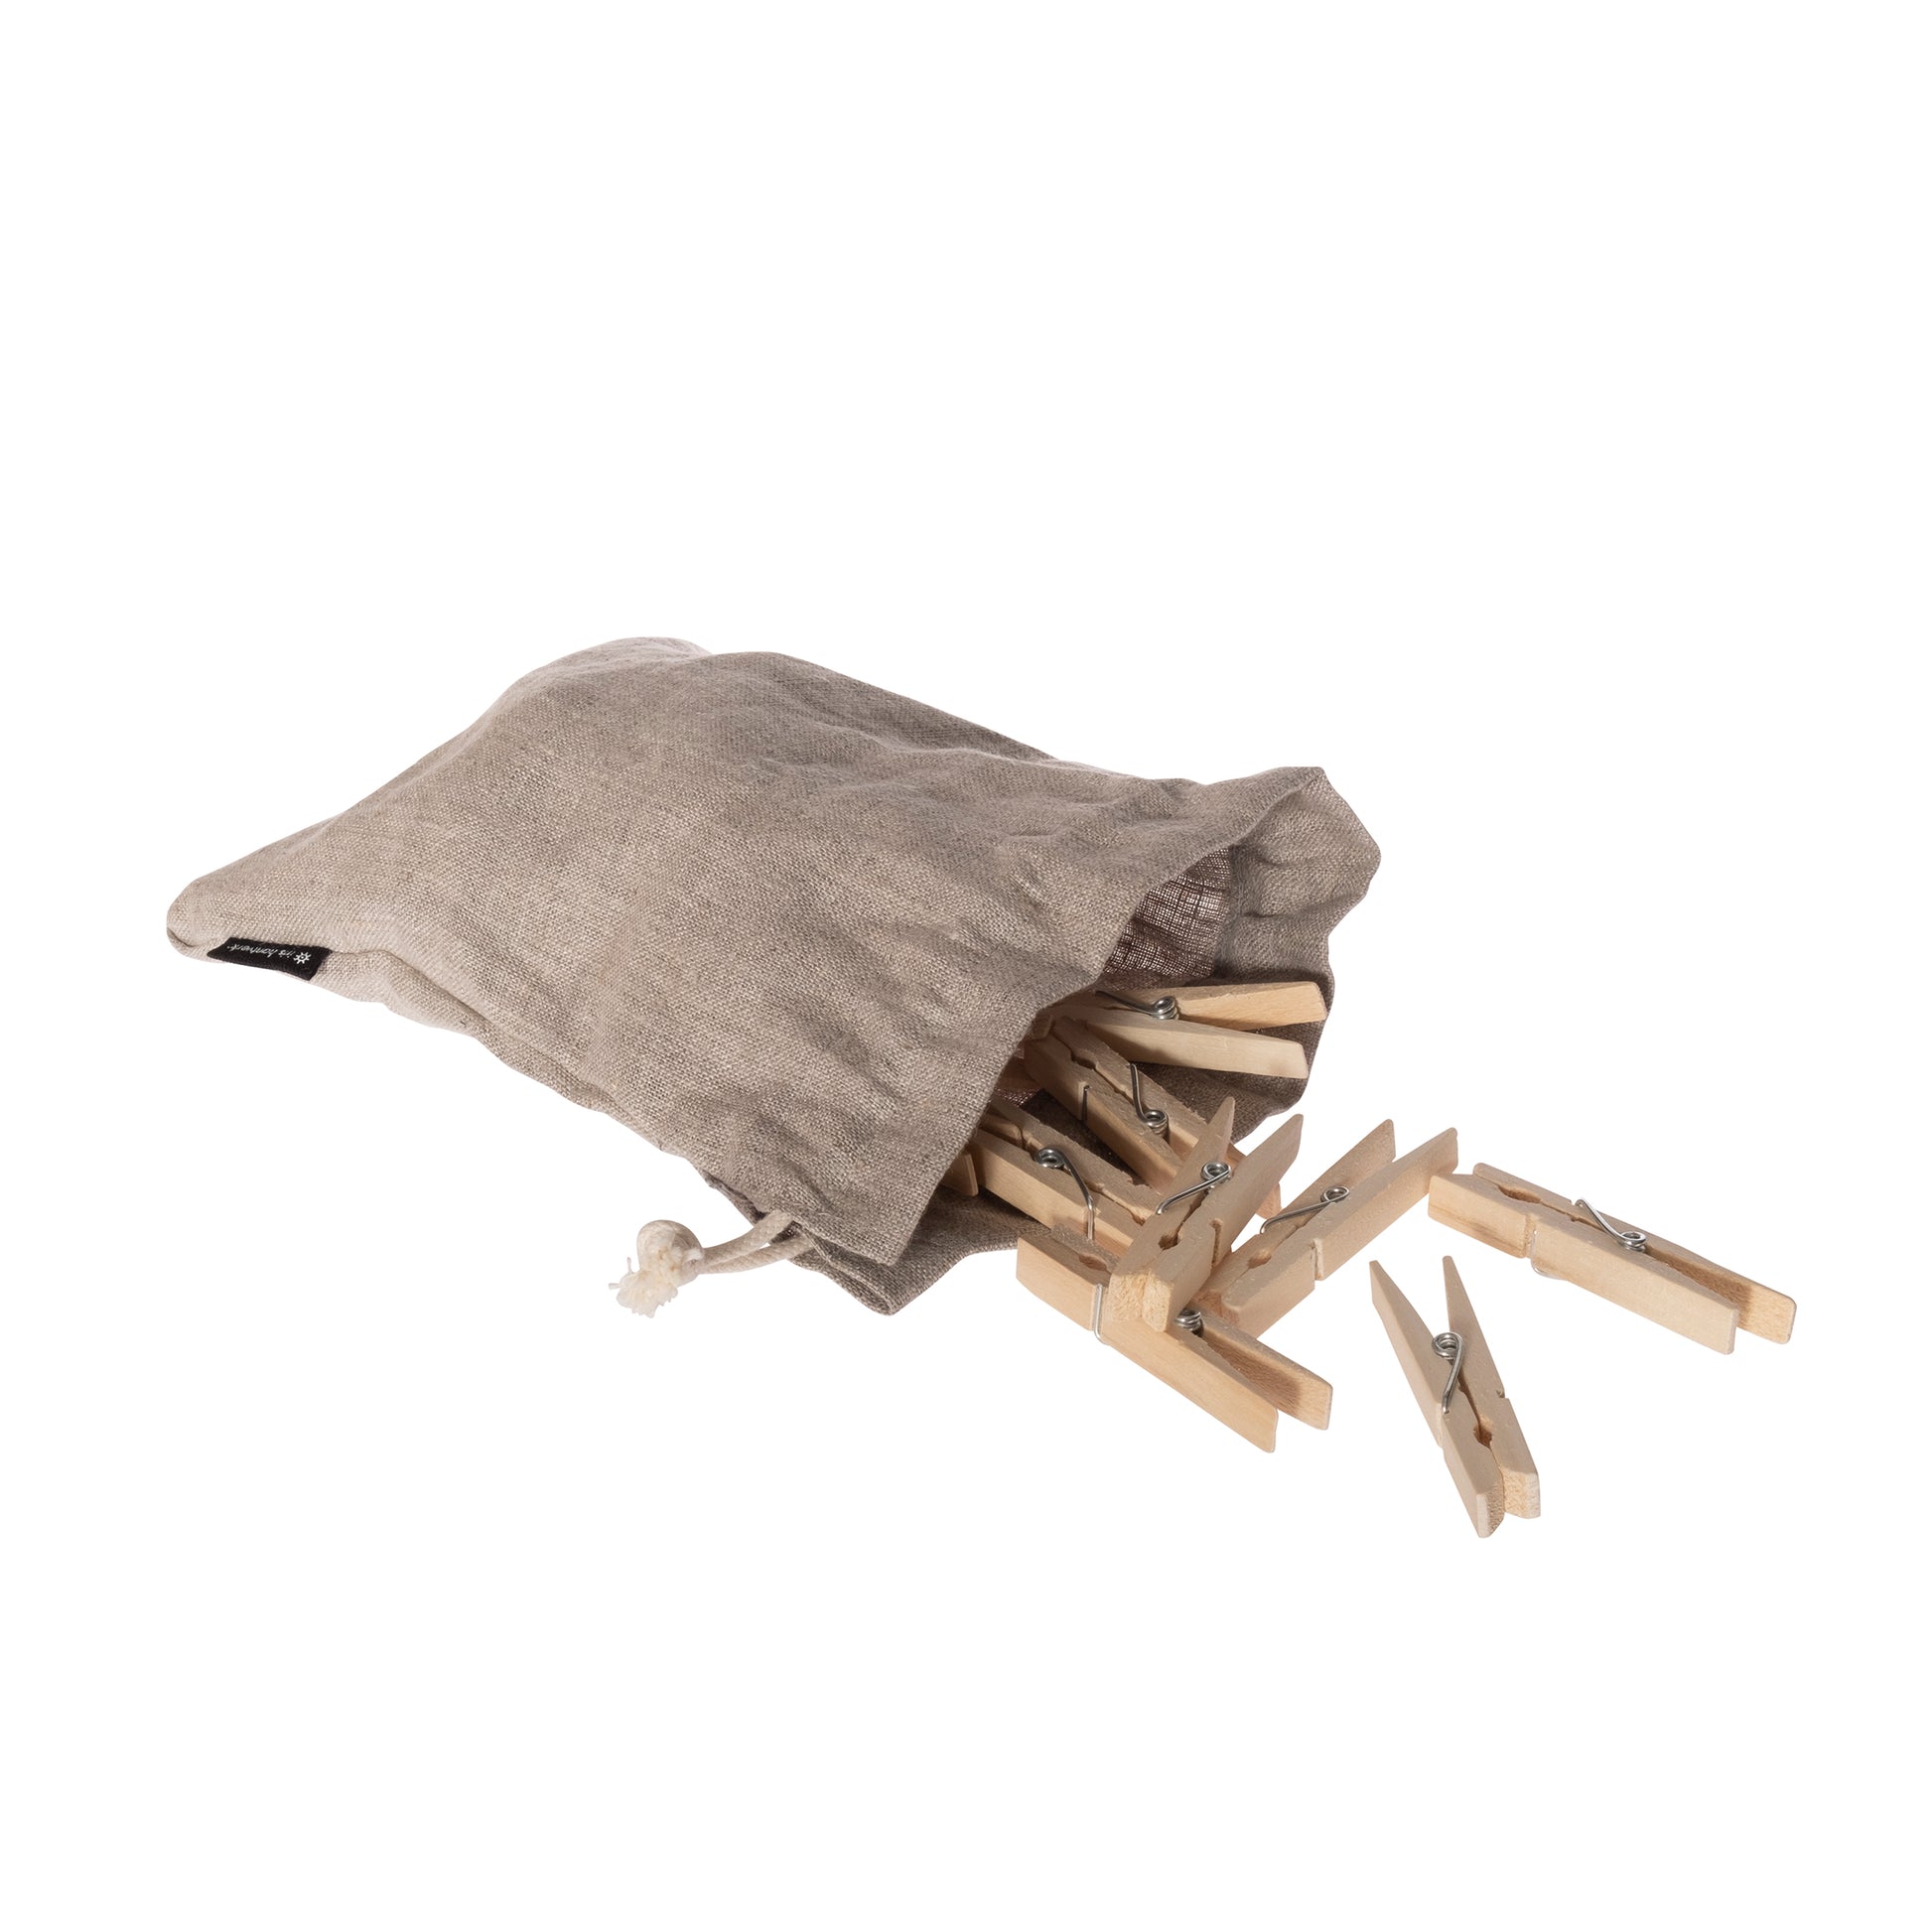 Linen drawstring bag with wooden clothespins spilling out